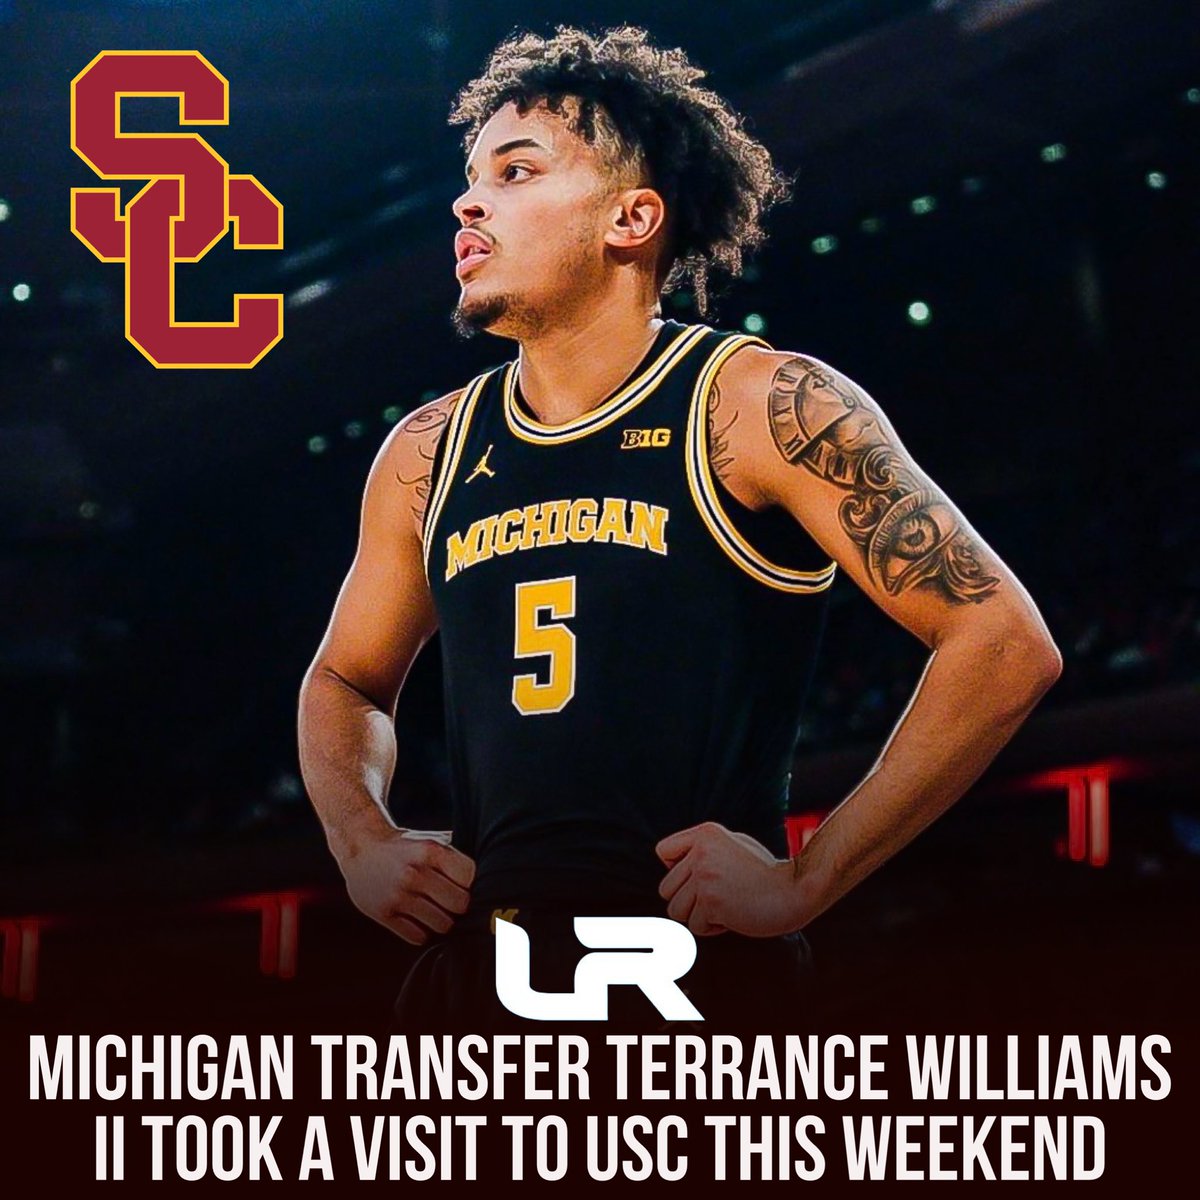 Michigan transfer Terrance Williams II told @LeagueRDY he took a visit to USC and Eric Musselman this weekend. Oklahoma State, Mississippi State, Texas and Georgia Tech are some of the other schools he says have been keeping in contact. He averaged 12.4PPG, 4.5RPG and 1.5APG…